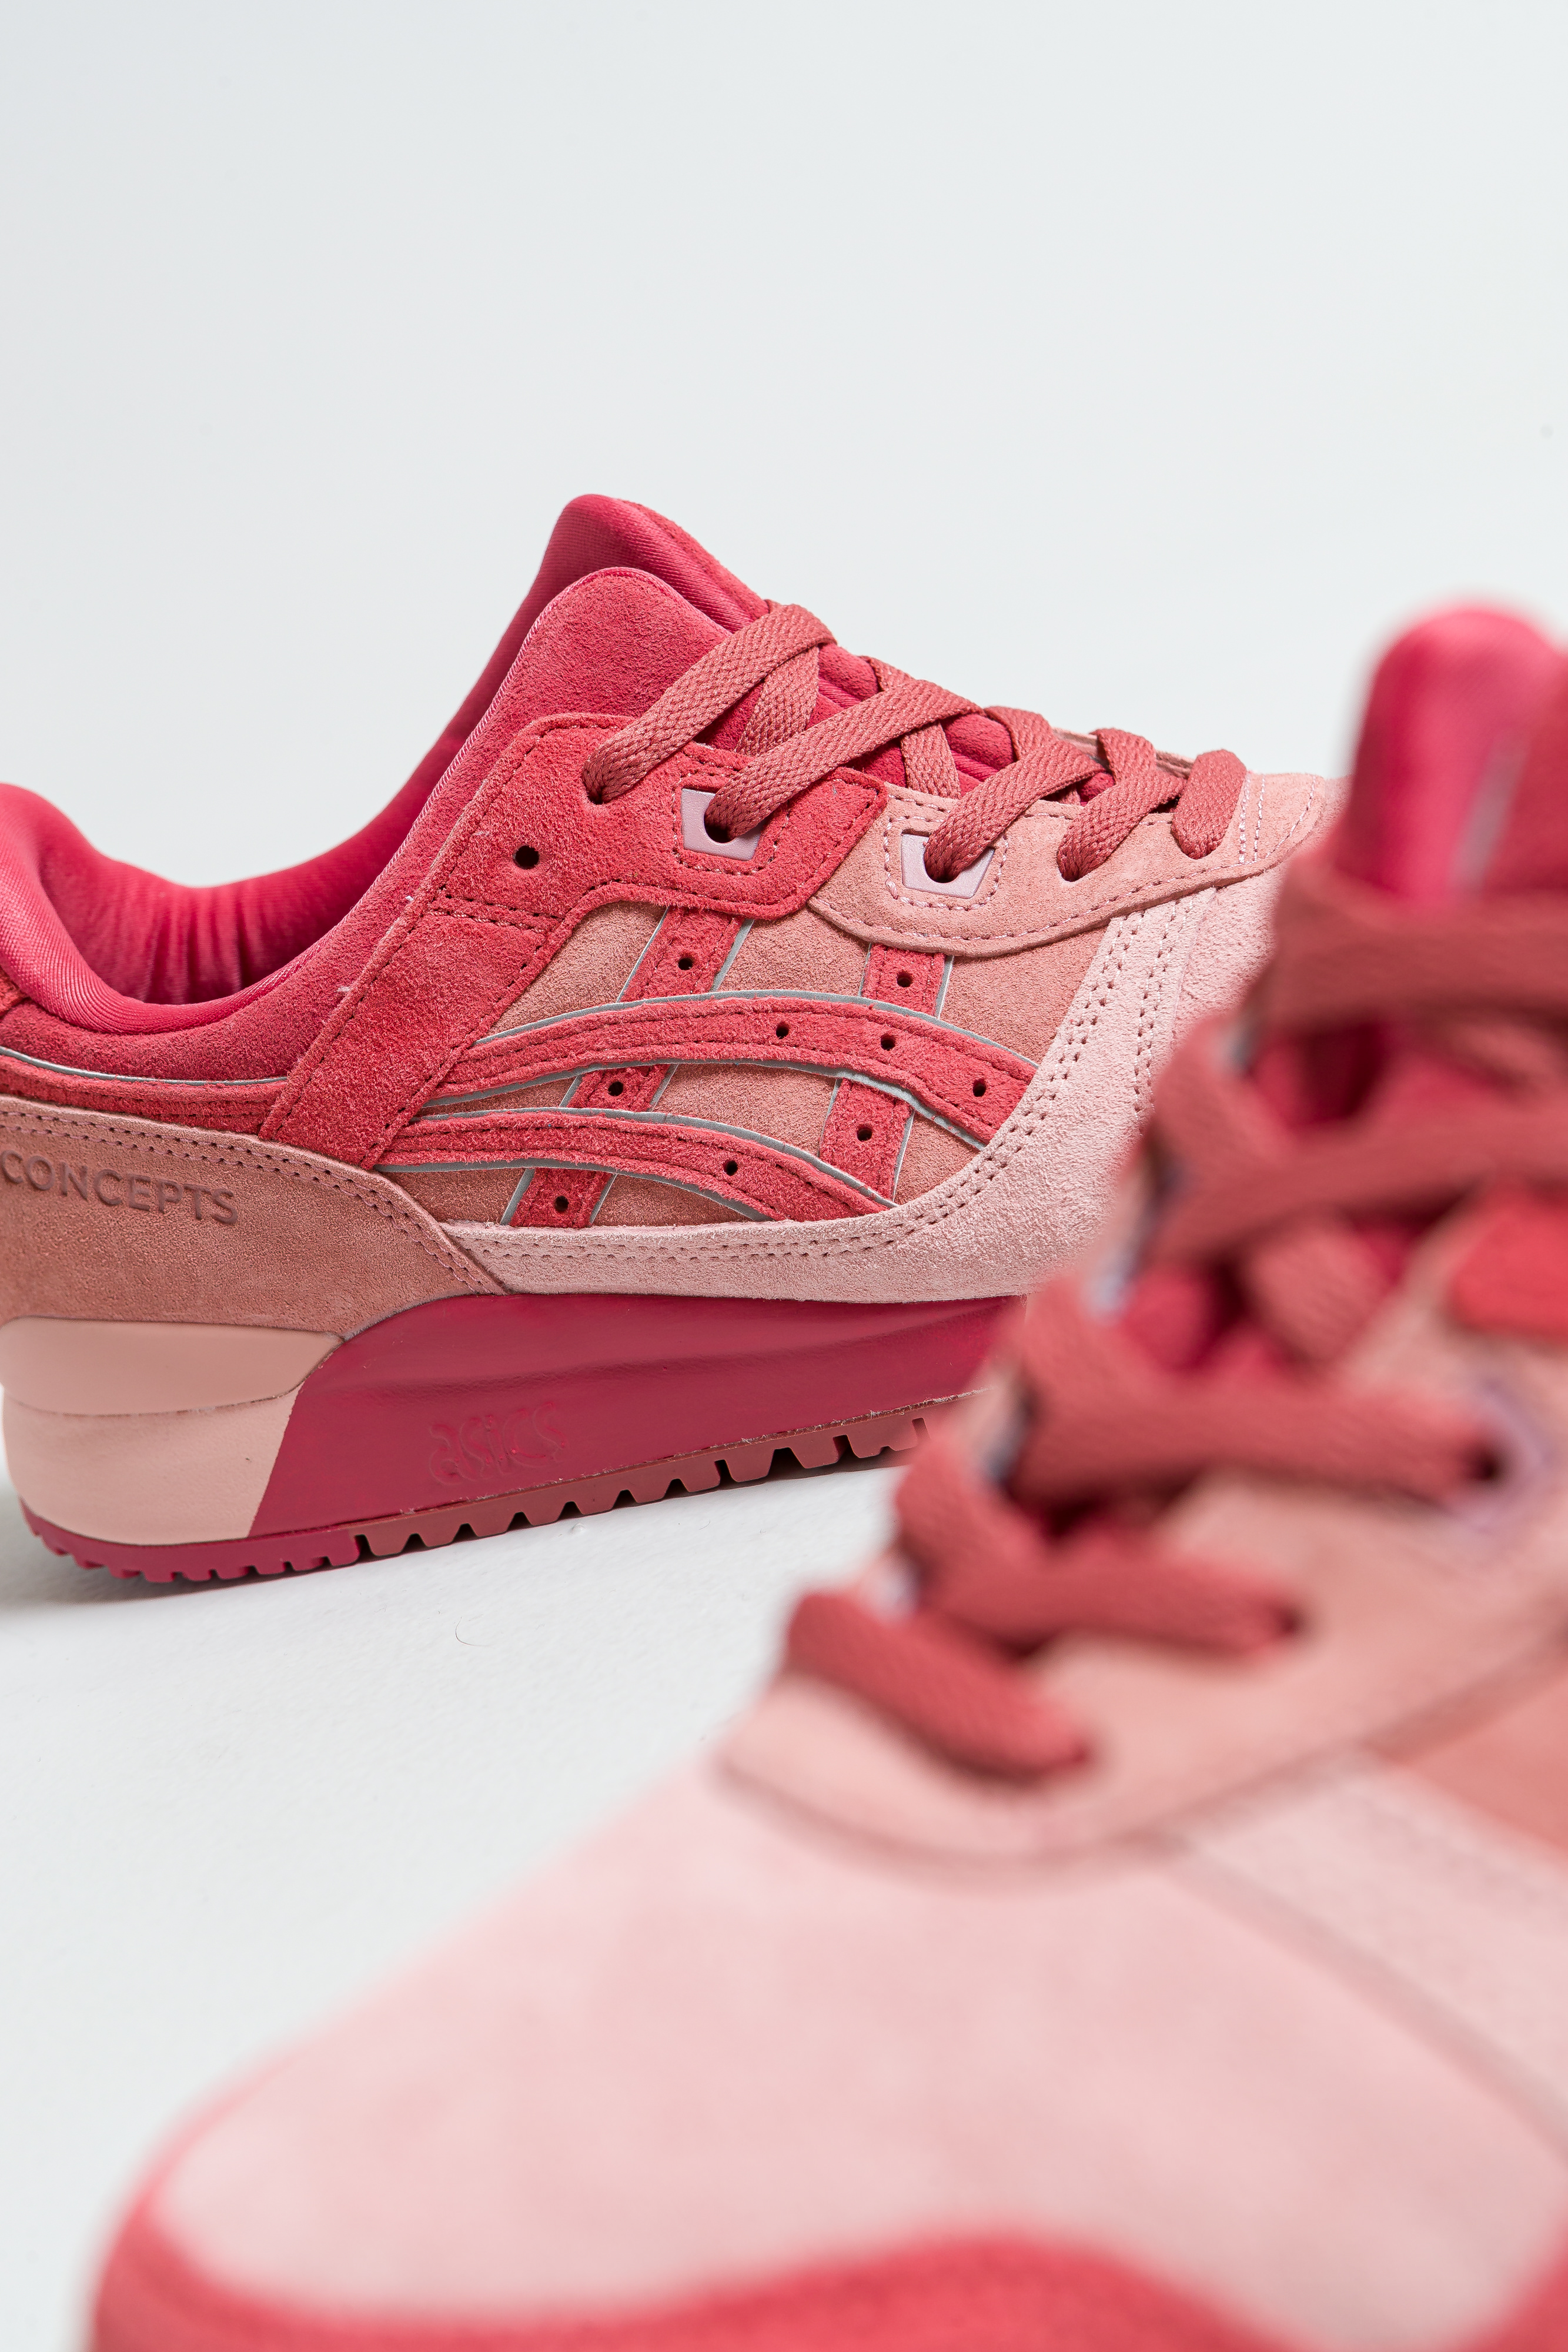 Up There Store - Asics X Concepts Gel-Lyte III 'Otoro'